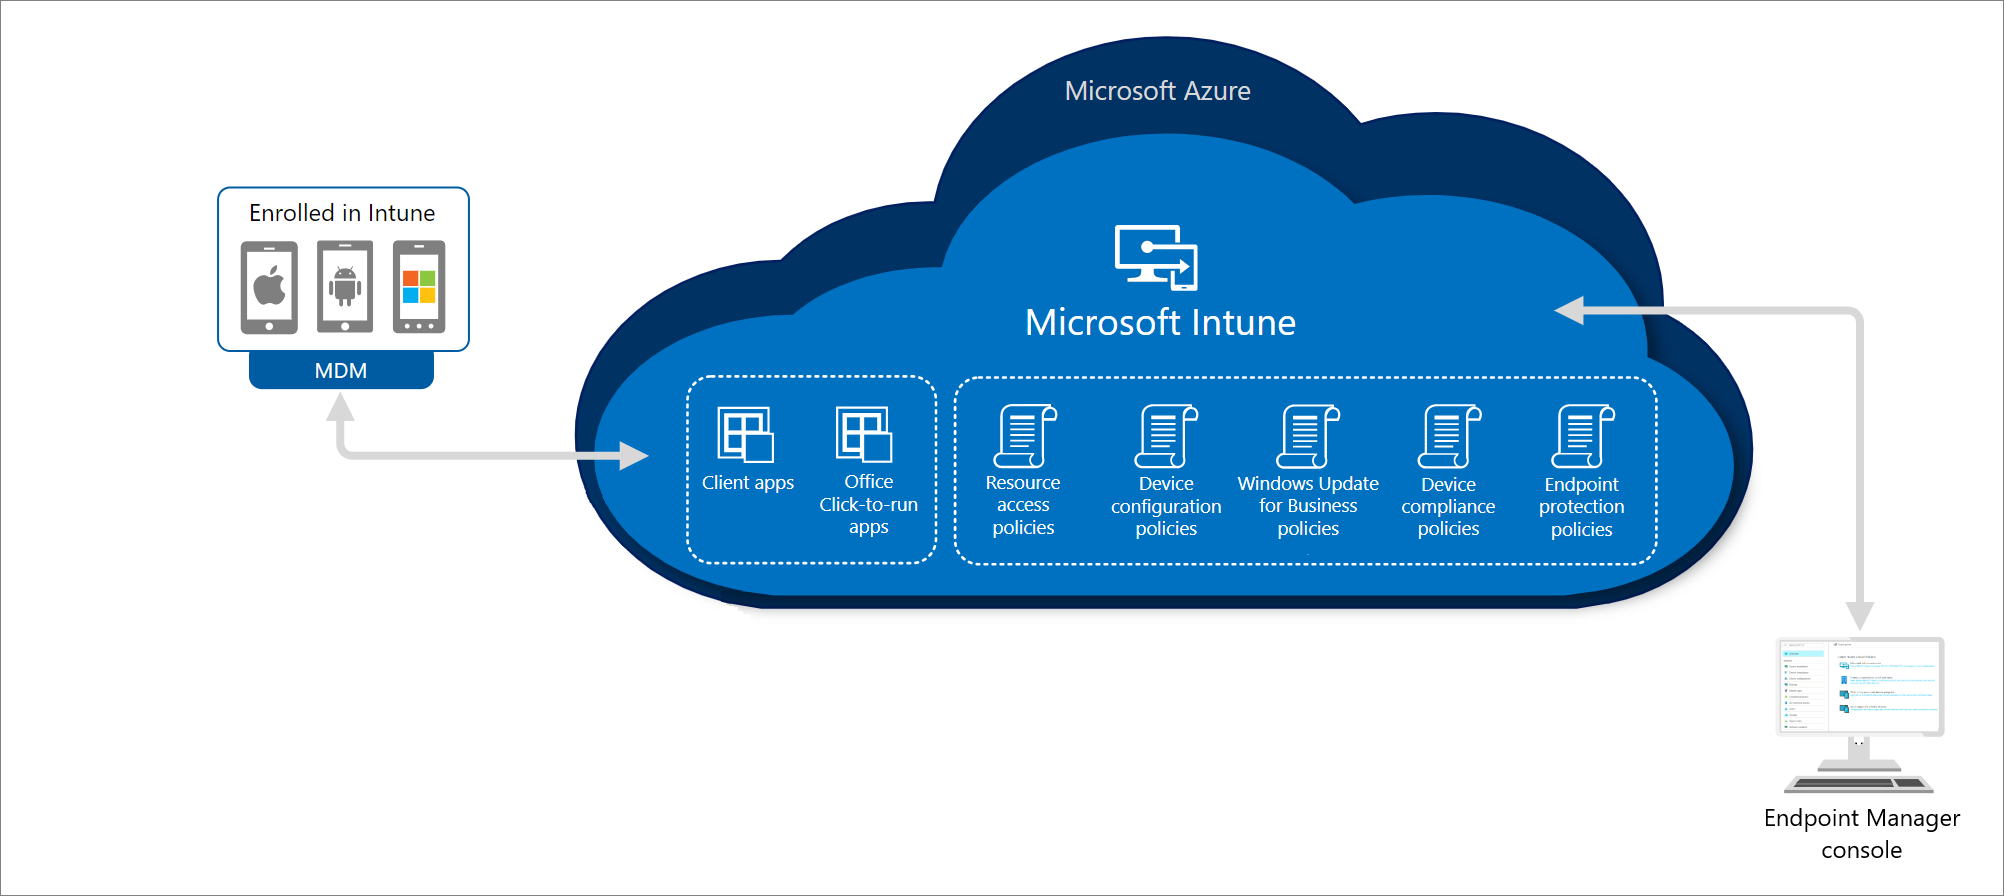 Try Microsoft Intune overview | Microsoft Learn